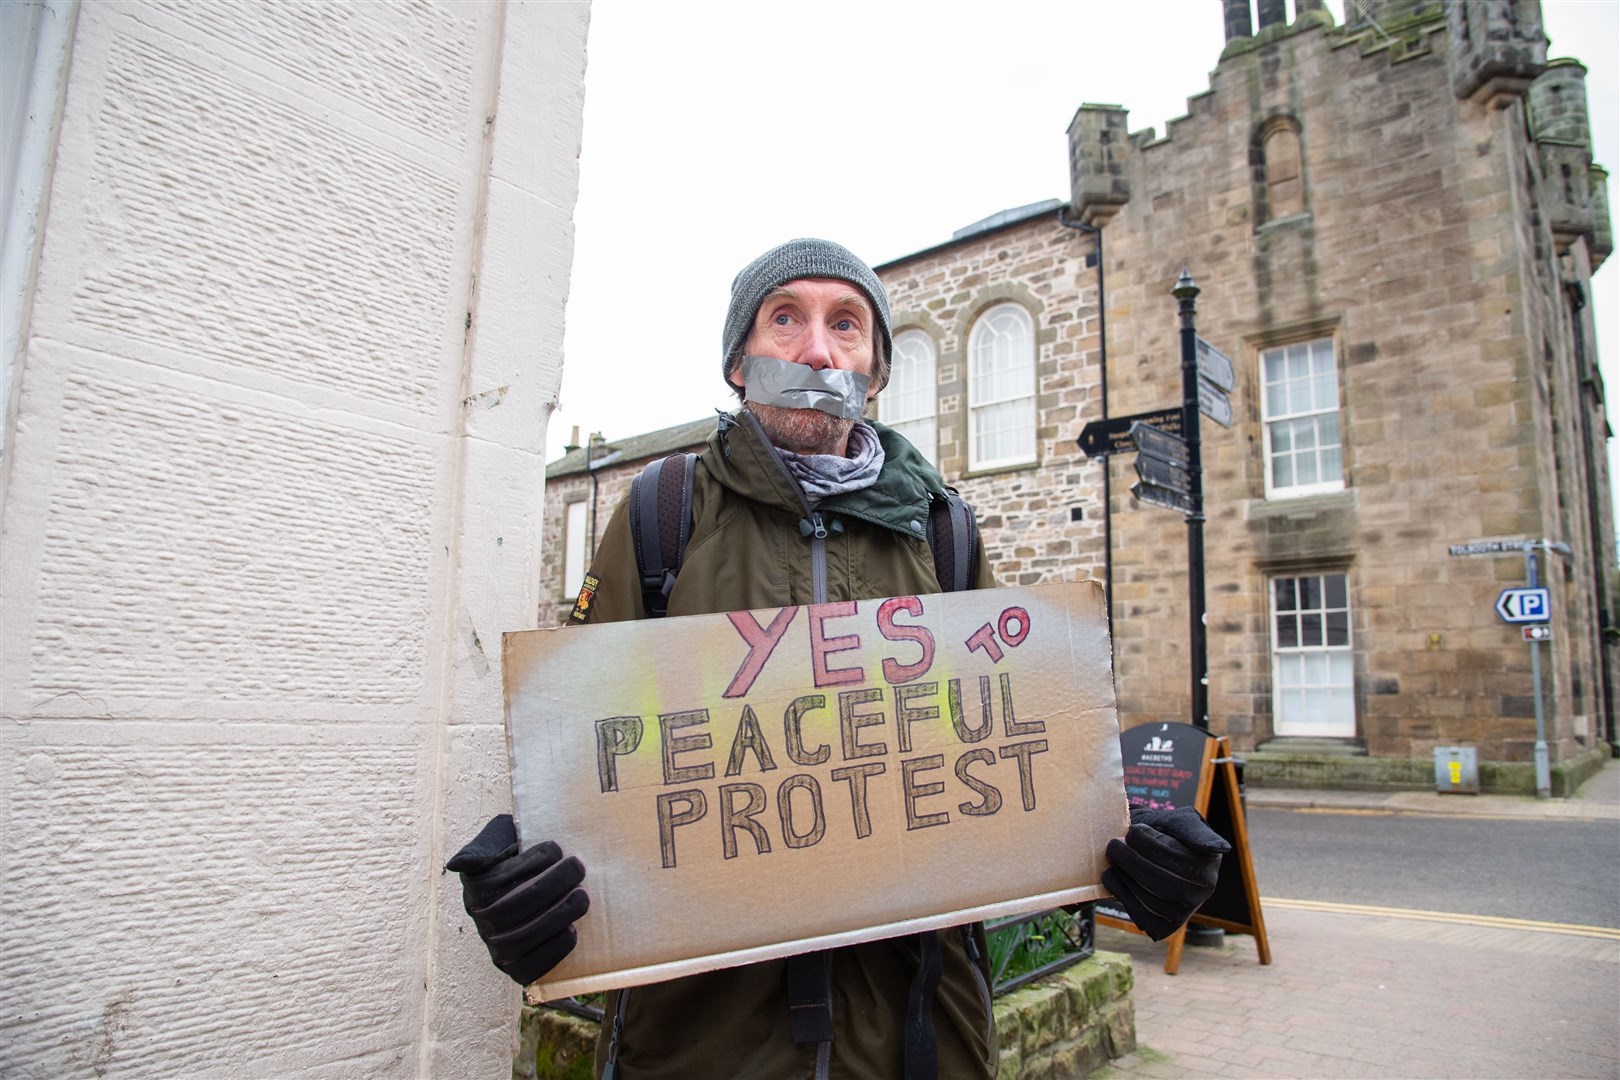 Activists gather on Forres High Street - around Moray MP Douglas Ross' office - to oppose the introduction of a new policing Bill, which would see changes to the law on protesting and protesters...Picture: Daniel Forsyth..